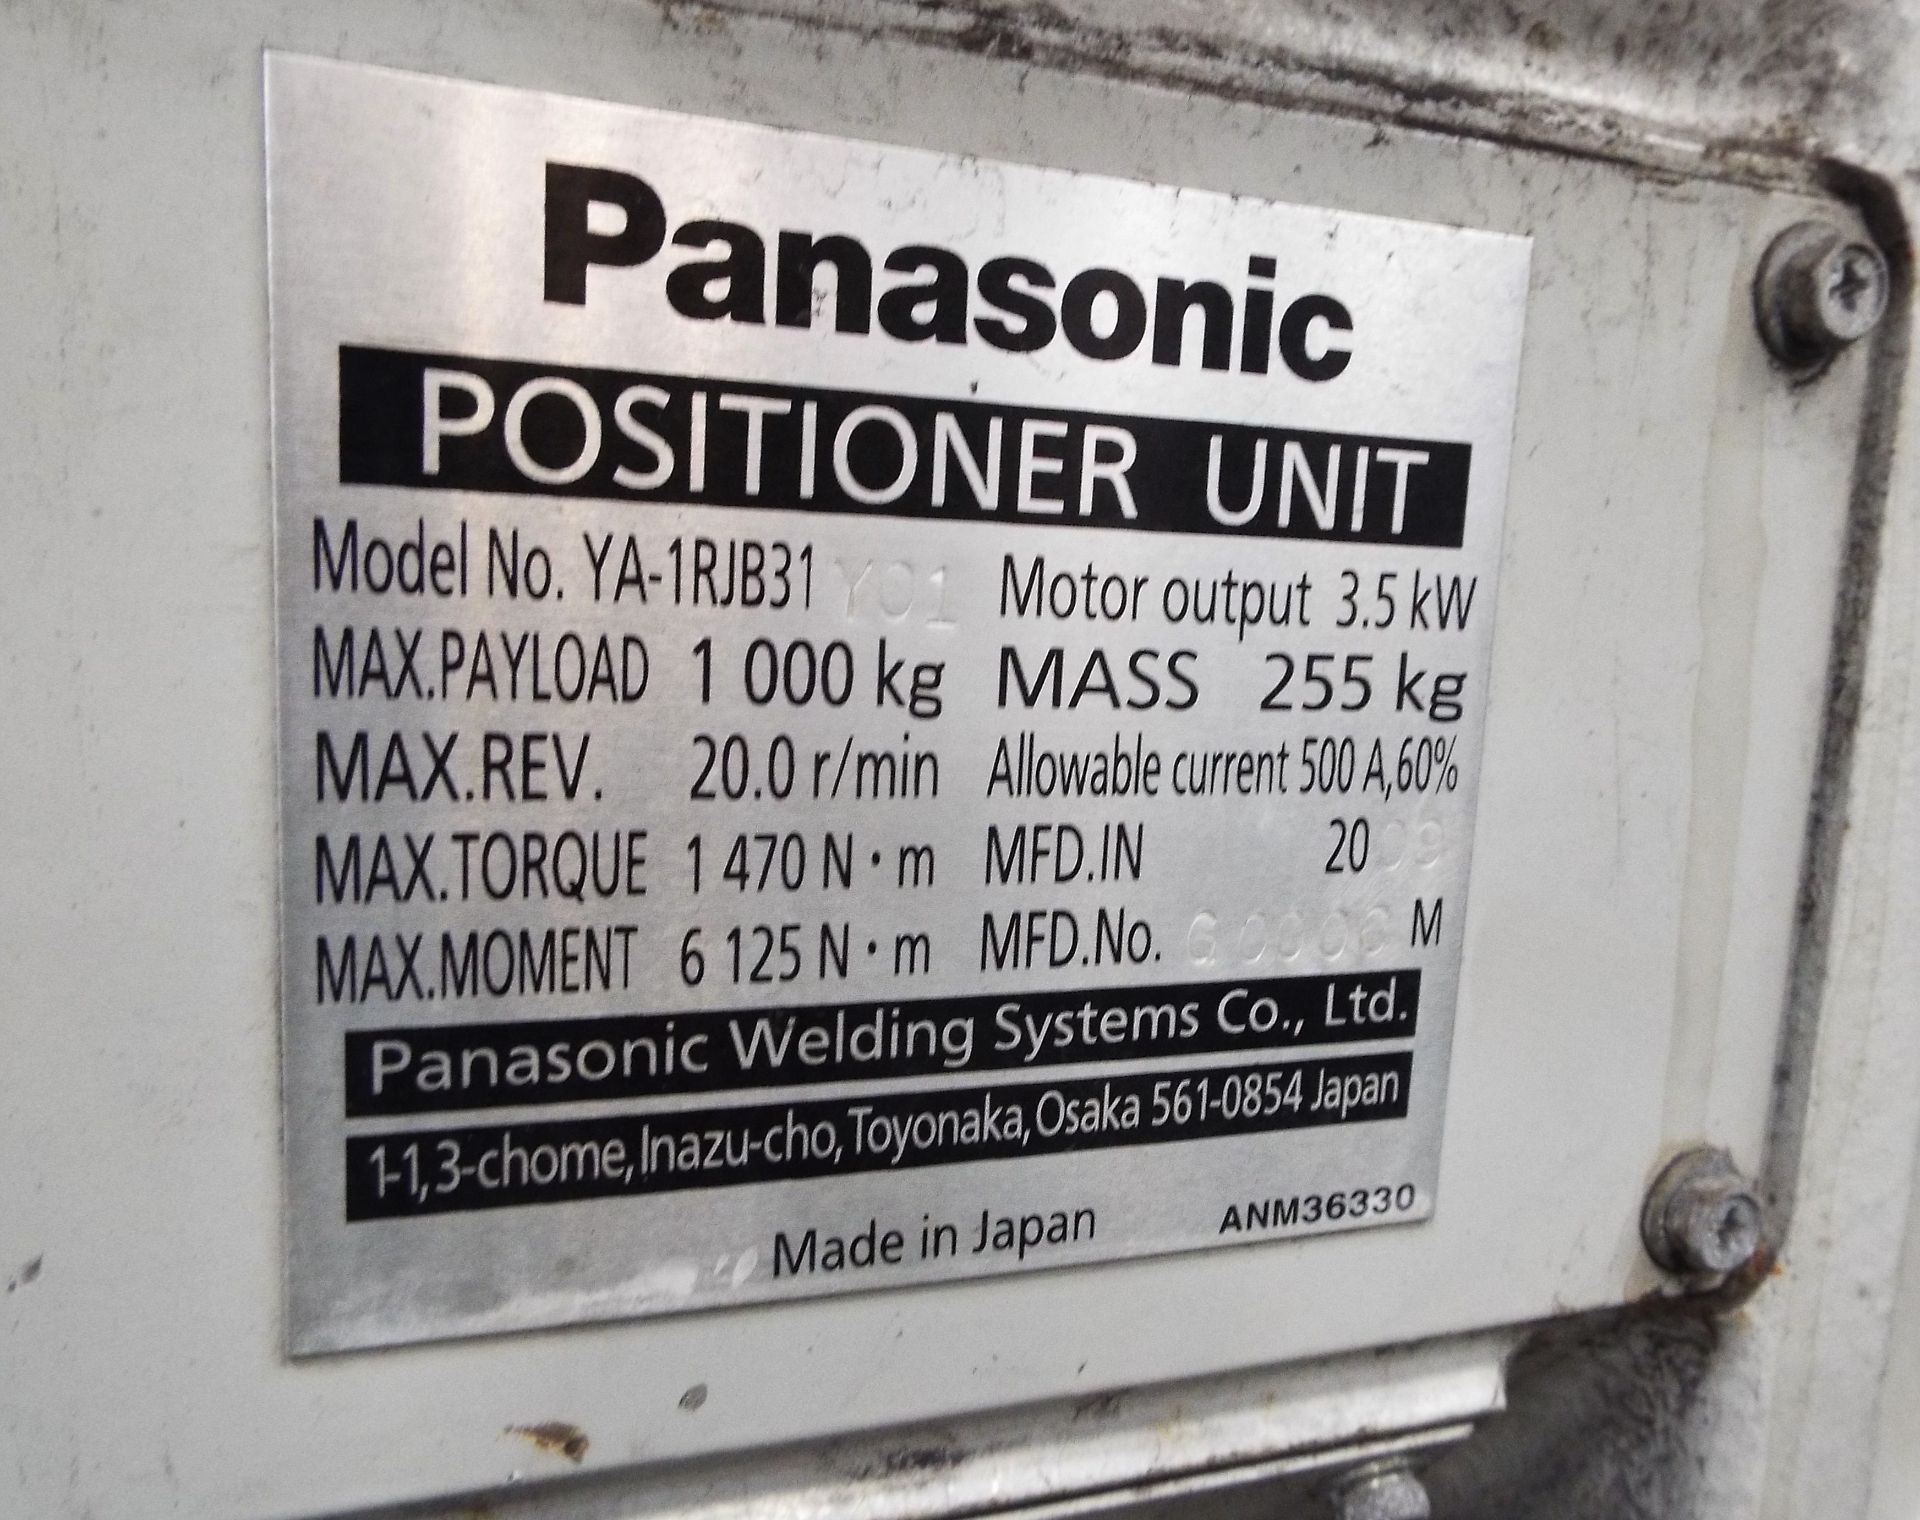 Panasonic TA1800 MIG Welding Robot cw Power Source,Transformer & 7th Axis Rotating Positioner - Image 11 of 12